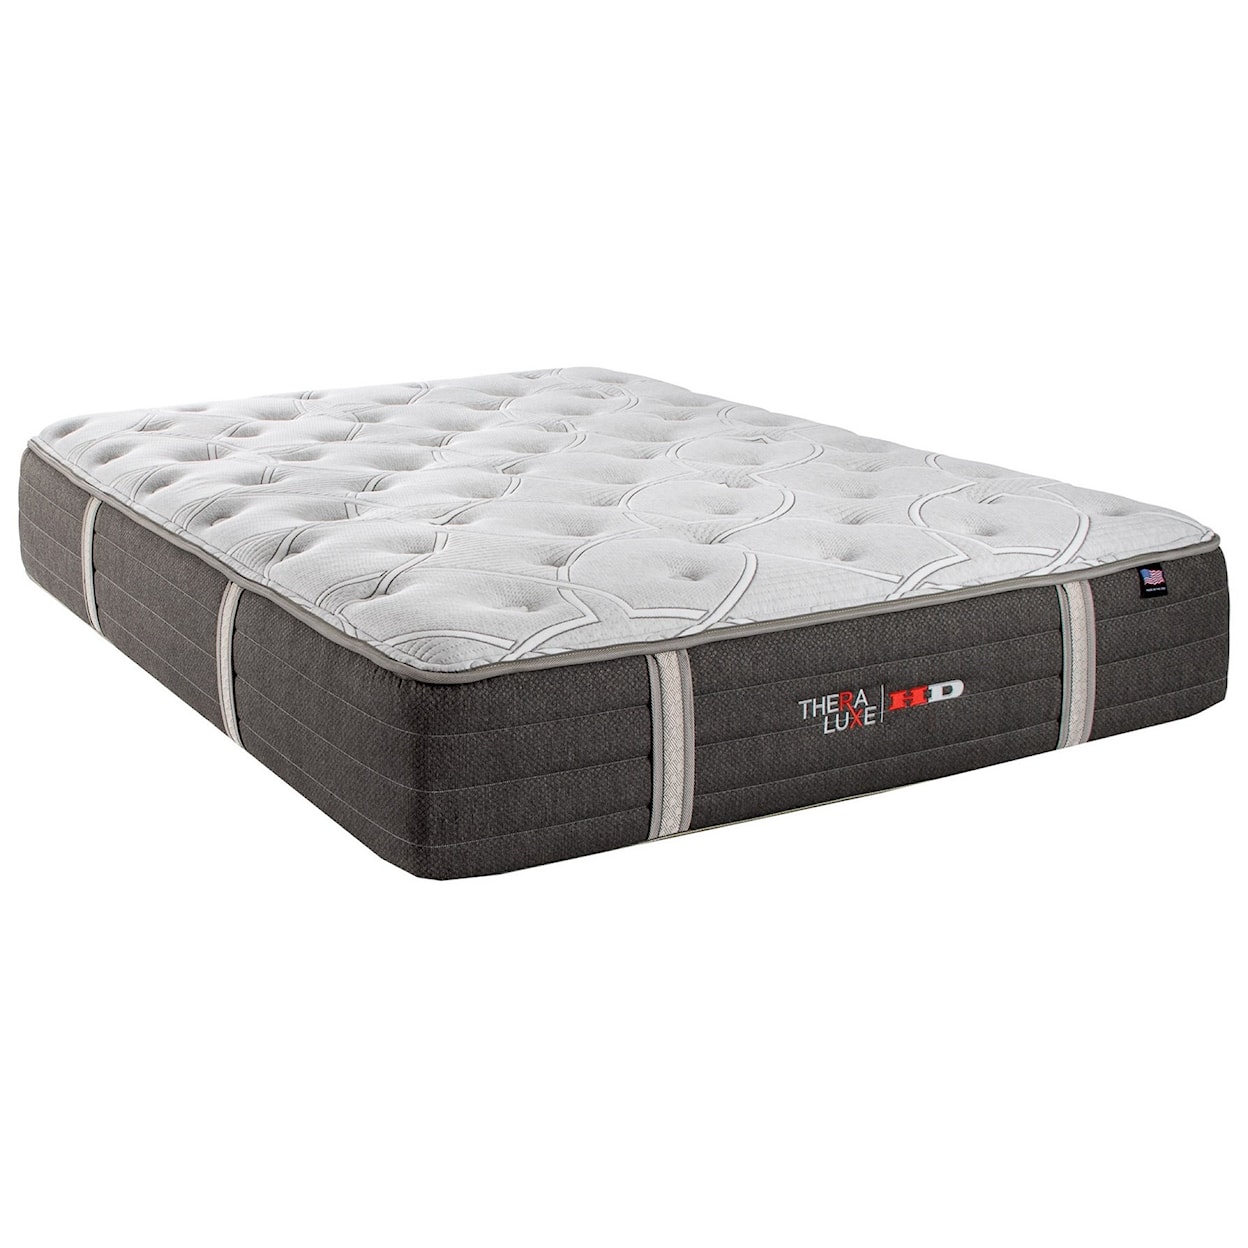 Therapedic Theraluxe Sequoia Twin Plush Pocketed Coil Mattress